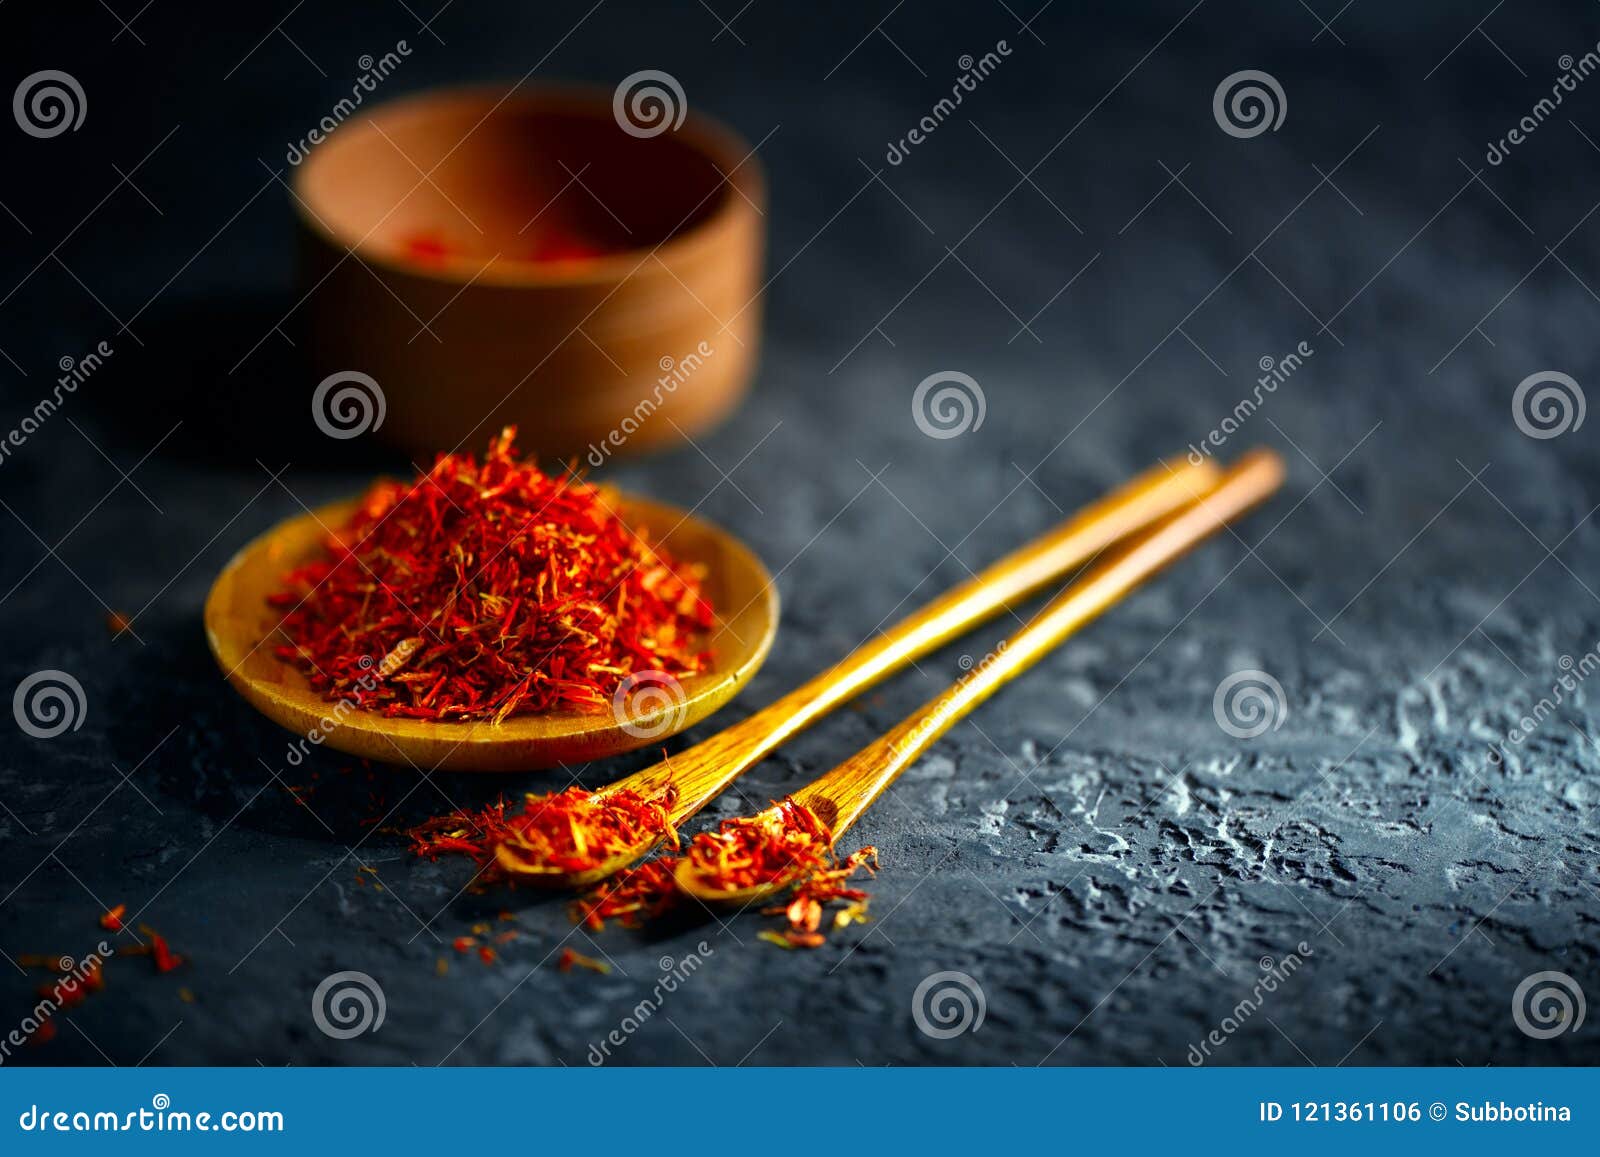 https://thumbs.dreamstime.com/z/saffron-spices-saffron-black-stone-table-wood-bowl-spoon-spice-herbs-slate-background-cooking-ingredients-121361106.jpg